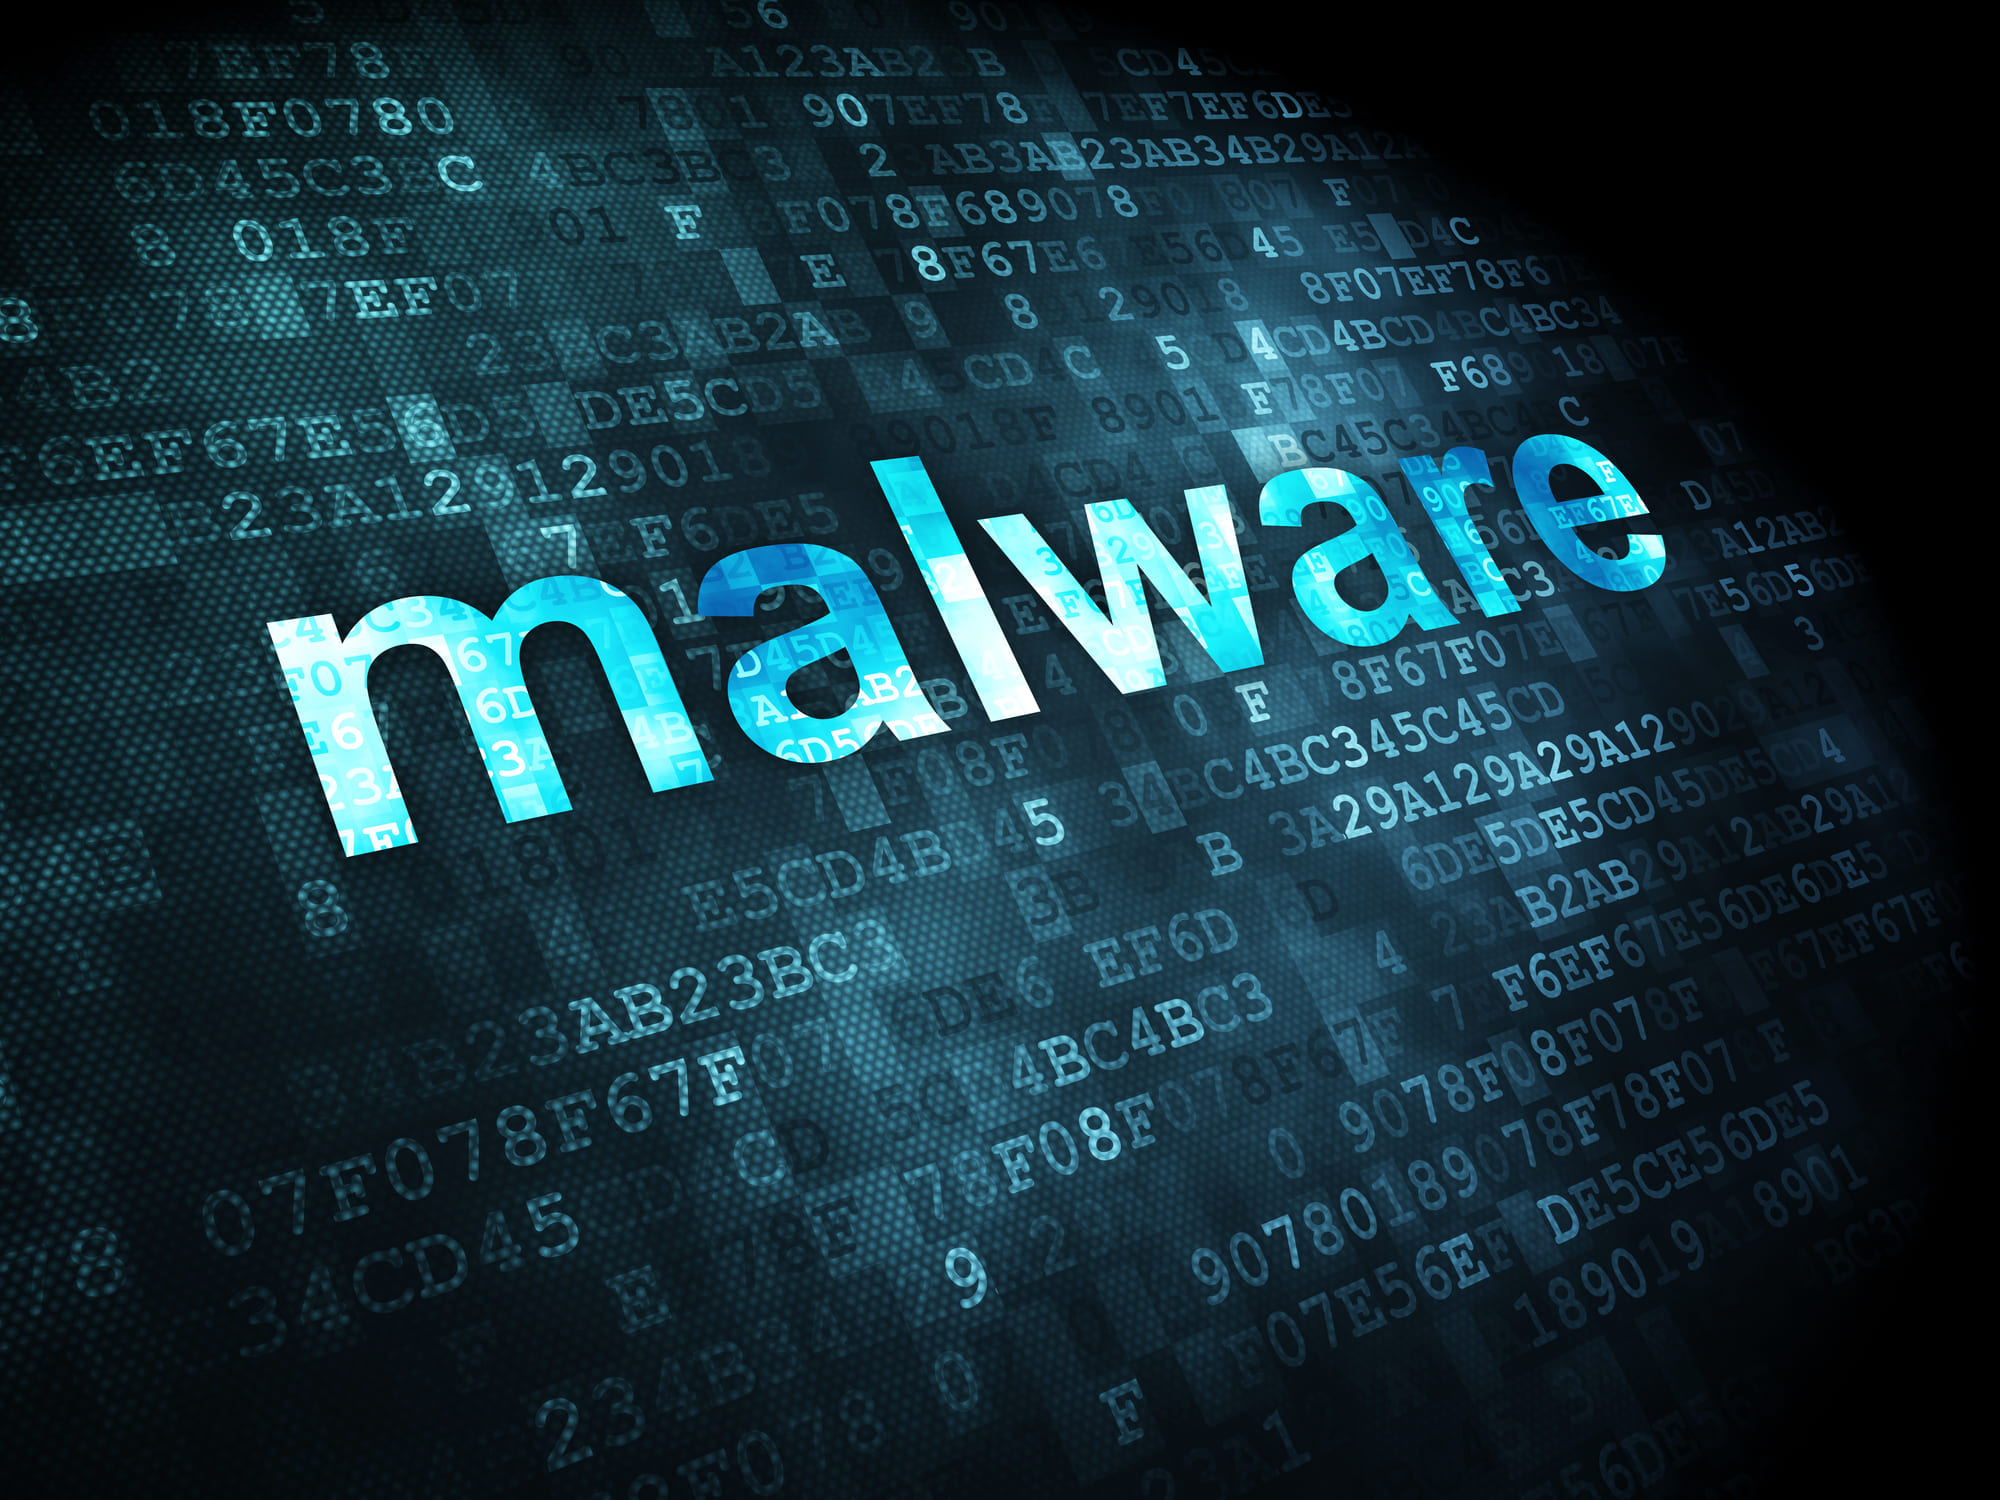 Surefire Signs You’re Infected With Spyware, Malware, and Viruses